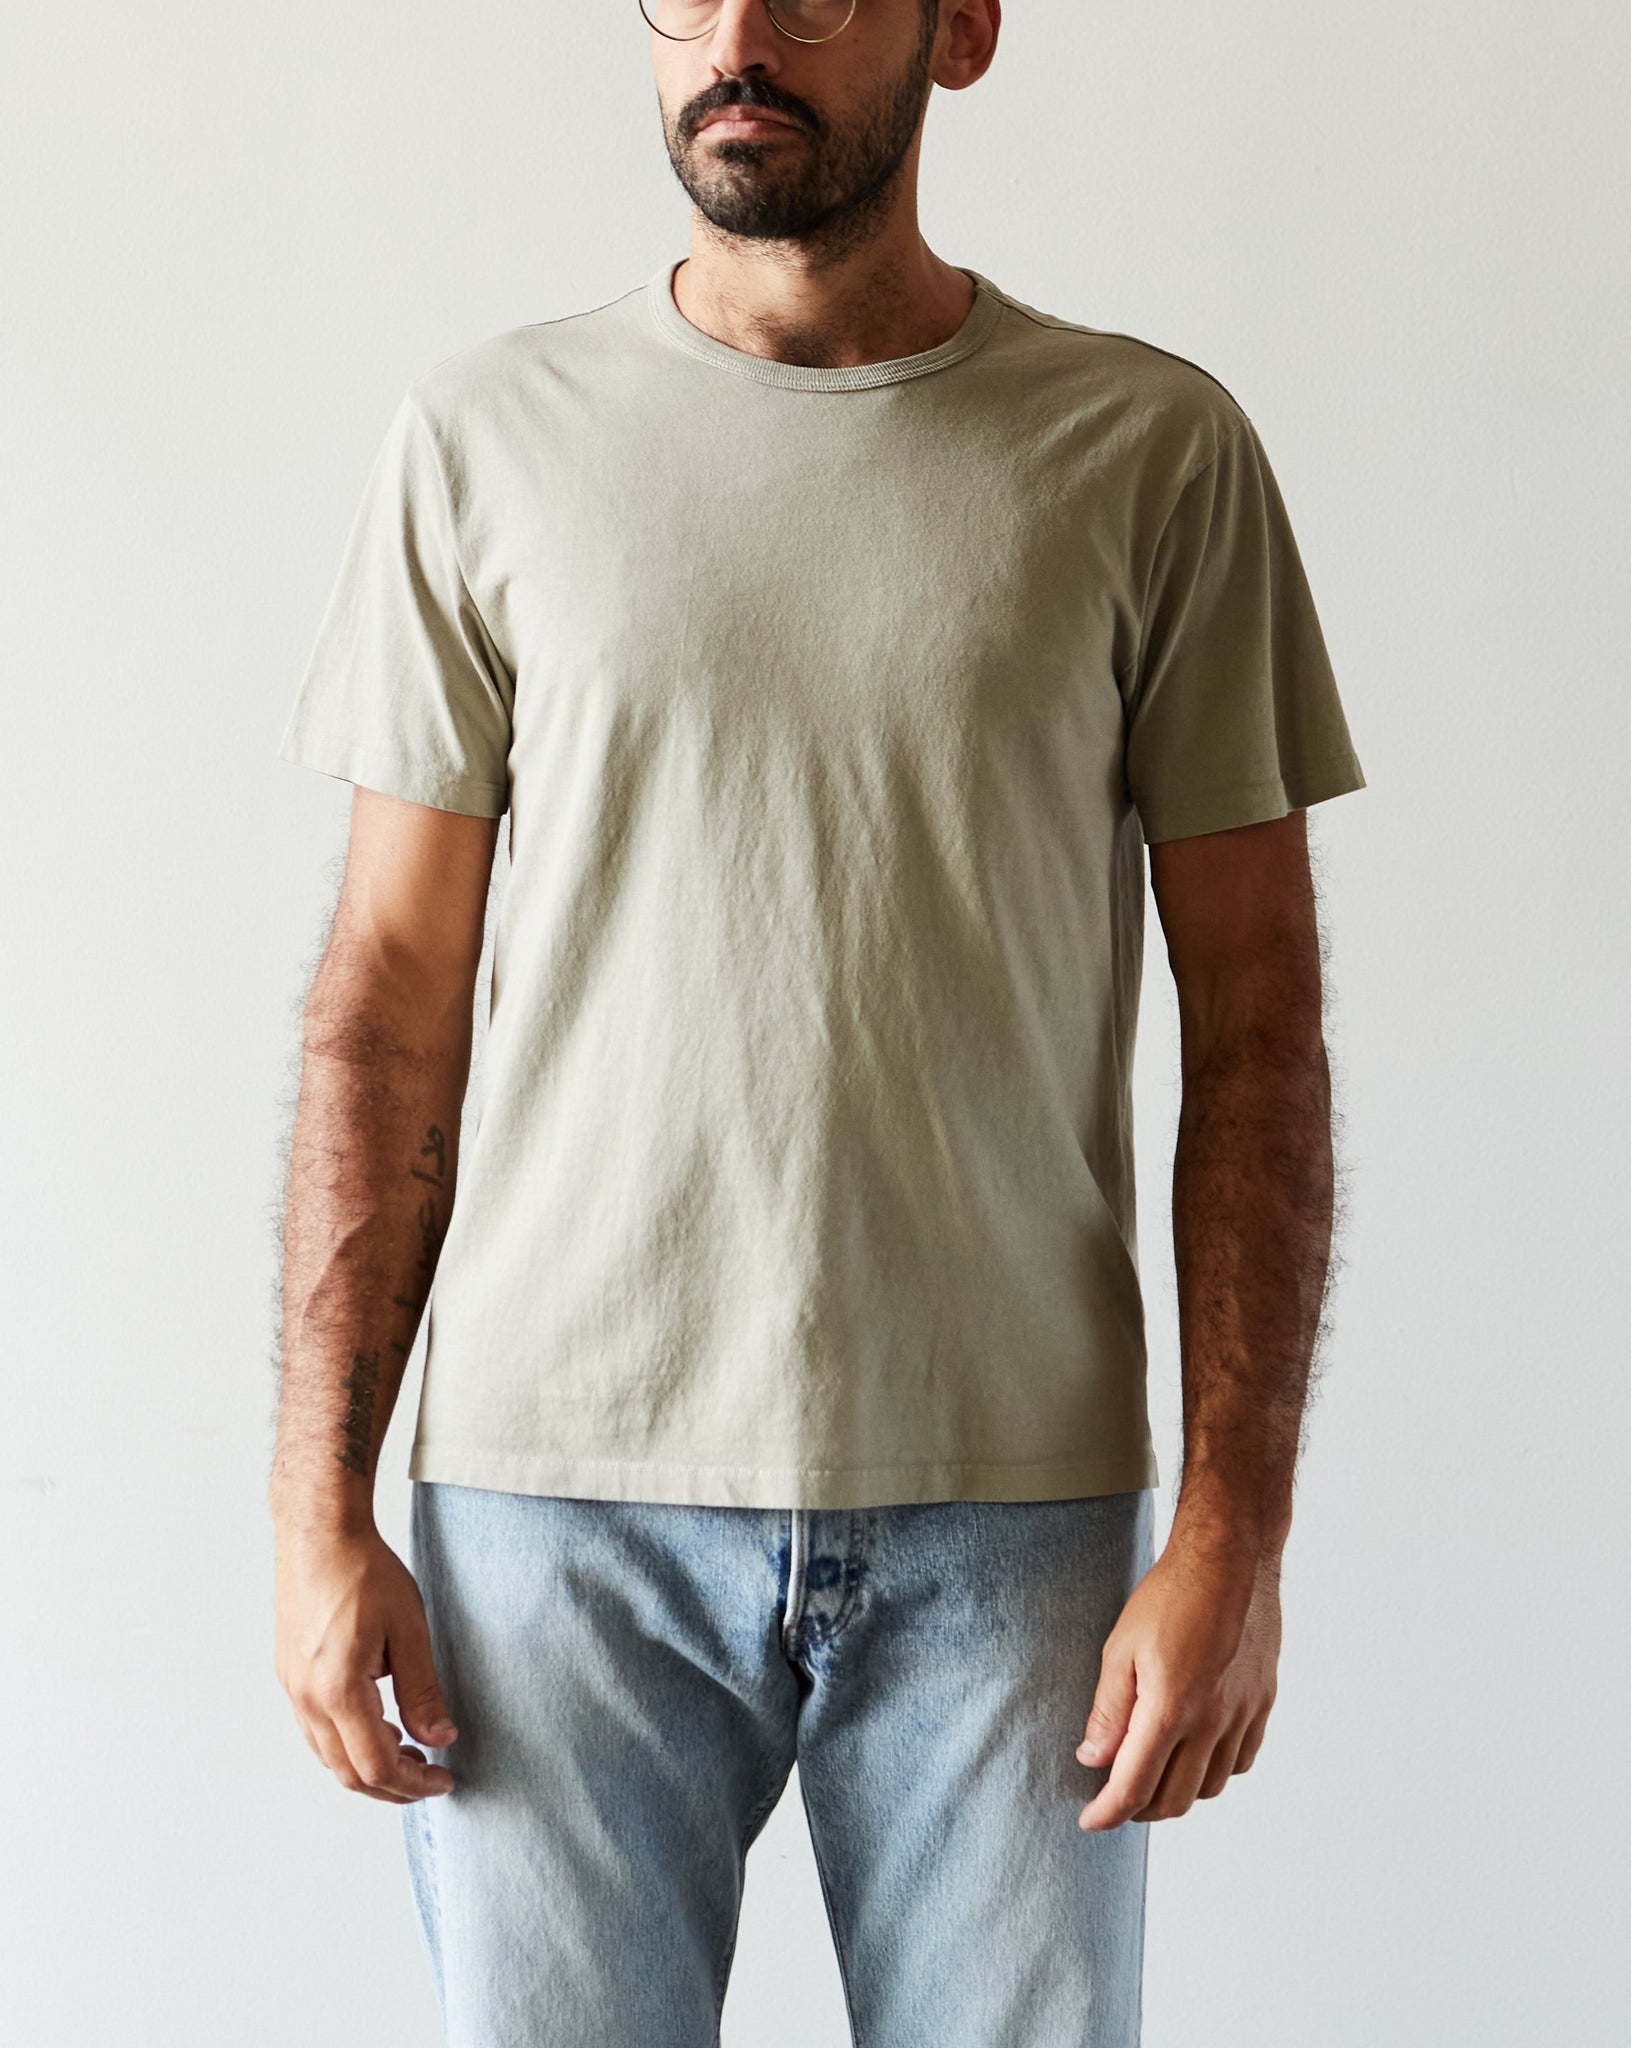 Lady White Our T-Shirt, Taupe Fog